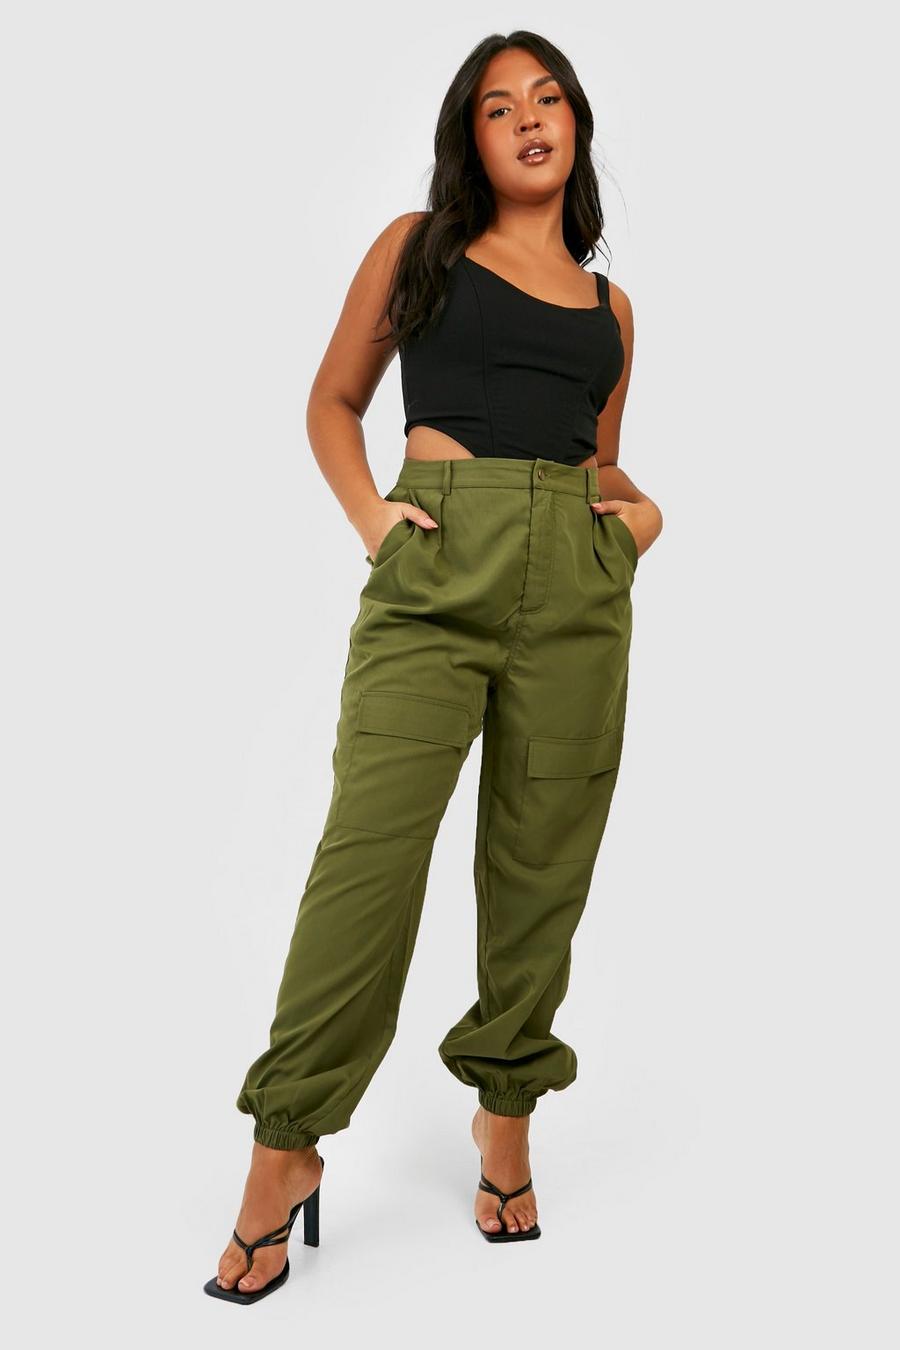 Boohoo Women Clothing Pants Cargo Pants 30 Mens Straight Leg Graphic Ripped Worker Pants 